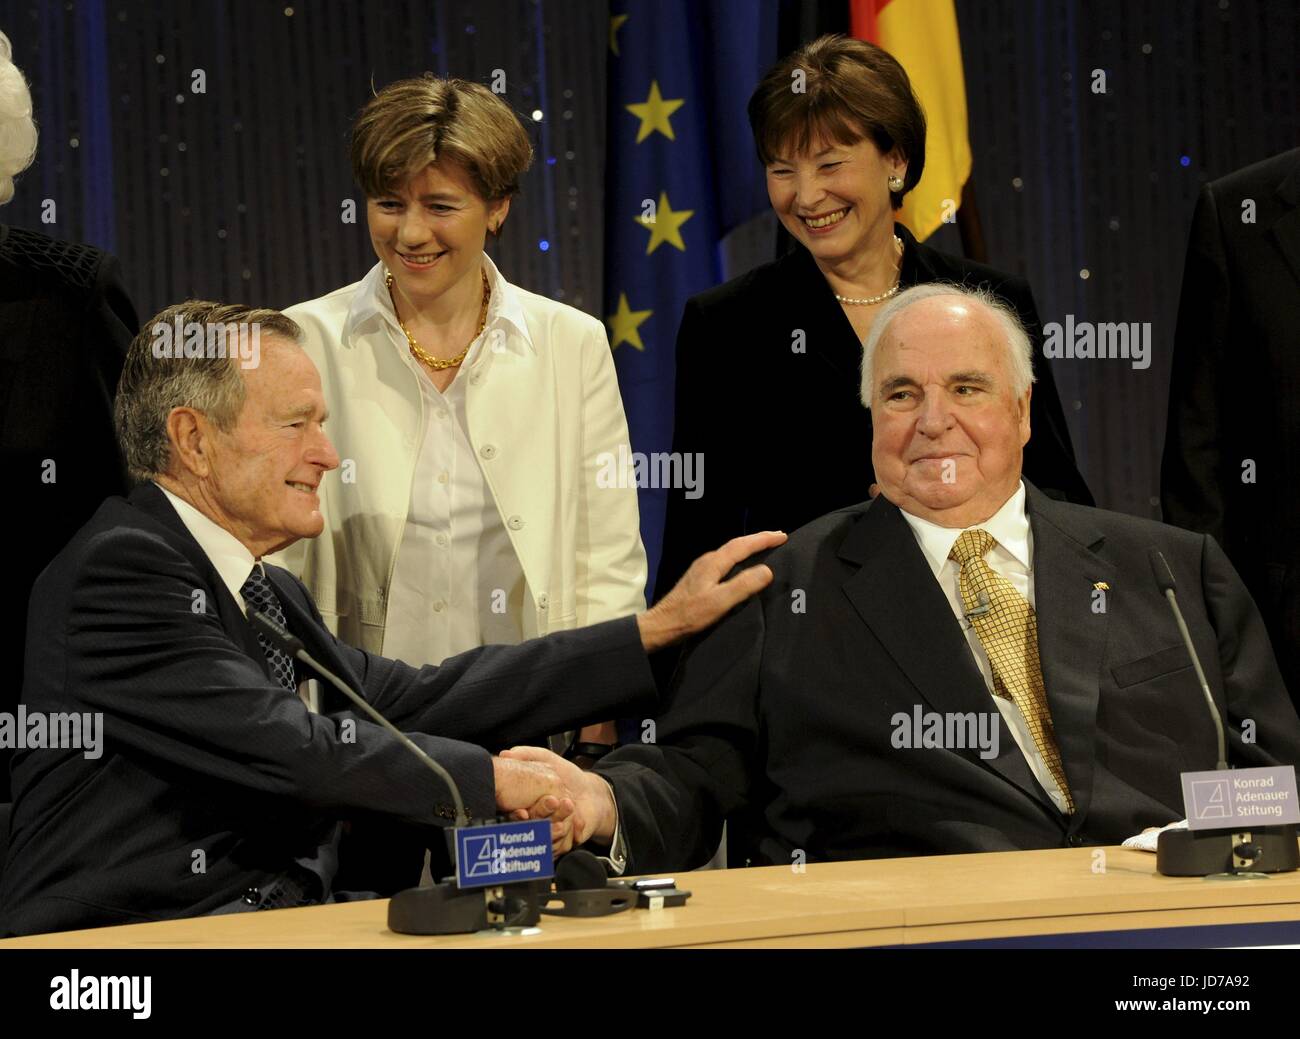 Berlin, Germany. 31st Oct, 2009. ARCHIVE - Former German chancellor Helmut Kohl (M) and the former US President George Bush Senior can be seen during a festive hour of the Konrad Adenauer Foundation in Berlin, Germany, 31 October 2009. Kohl passed away at the age of 87 in Eggershaim on the 16th of June 2017. He was chancellor for 16 years and head of the party CDU for quarter of a century. Photo: Tim Brakemeier/dpa/Alamy Live News Stock Photo